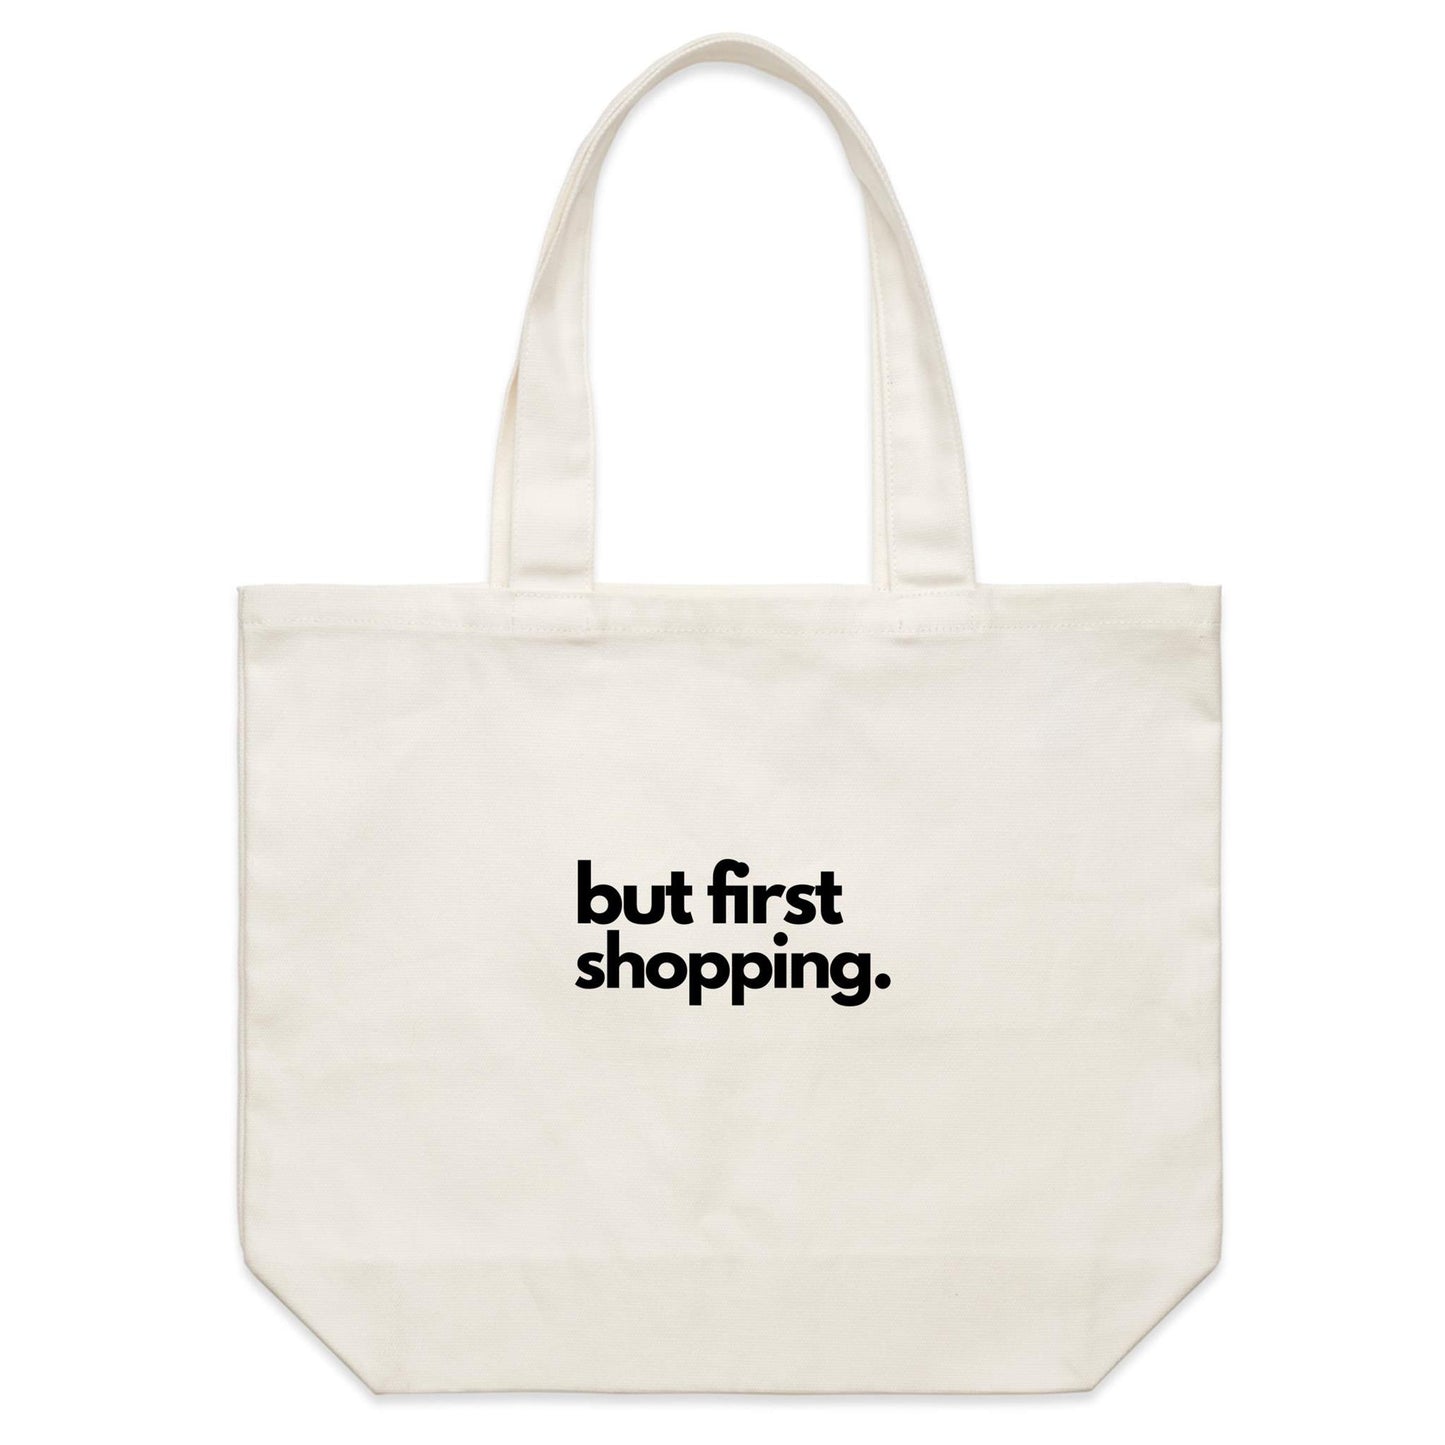 but first shopping...Shoulder Canvas Tote Bag